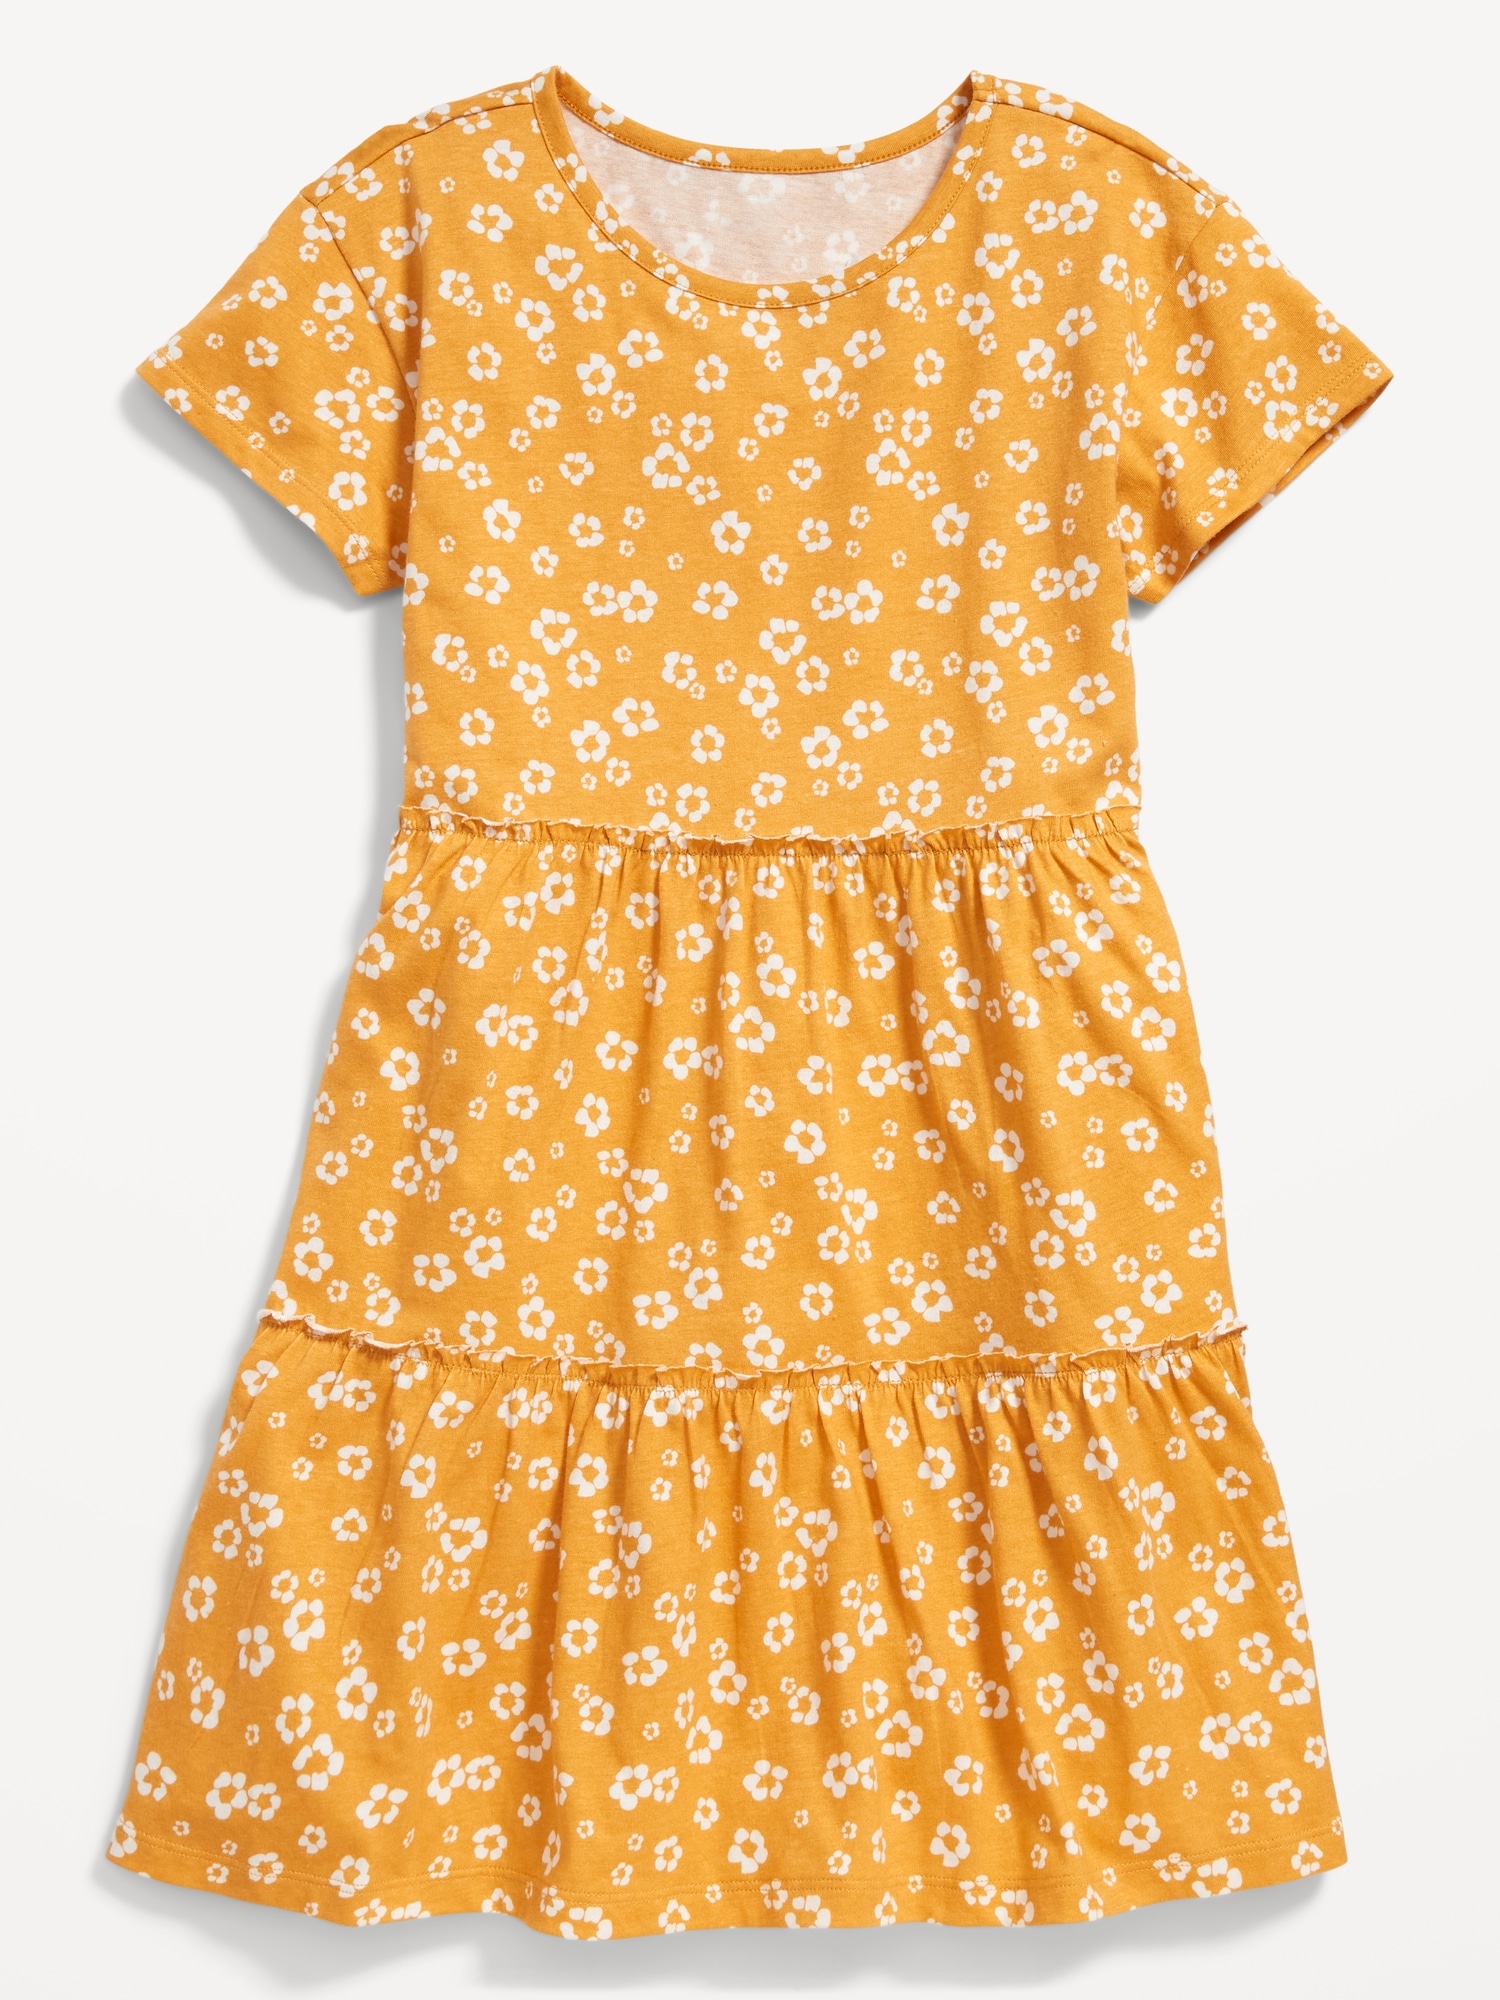 Tiered Printed Short-Sleeve Swing Dress for Girls On Sale At Old Navy